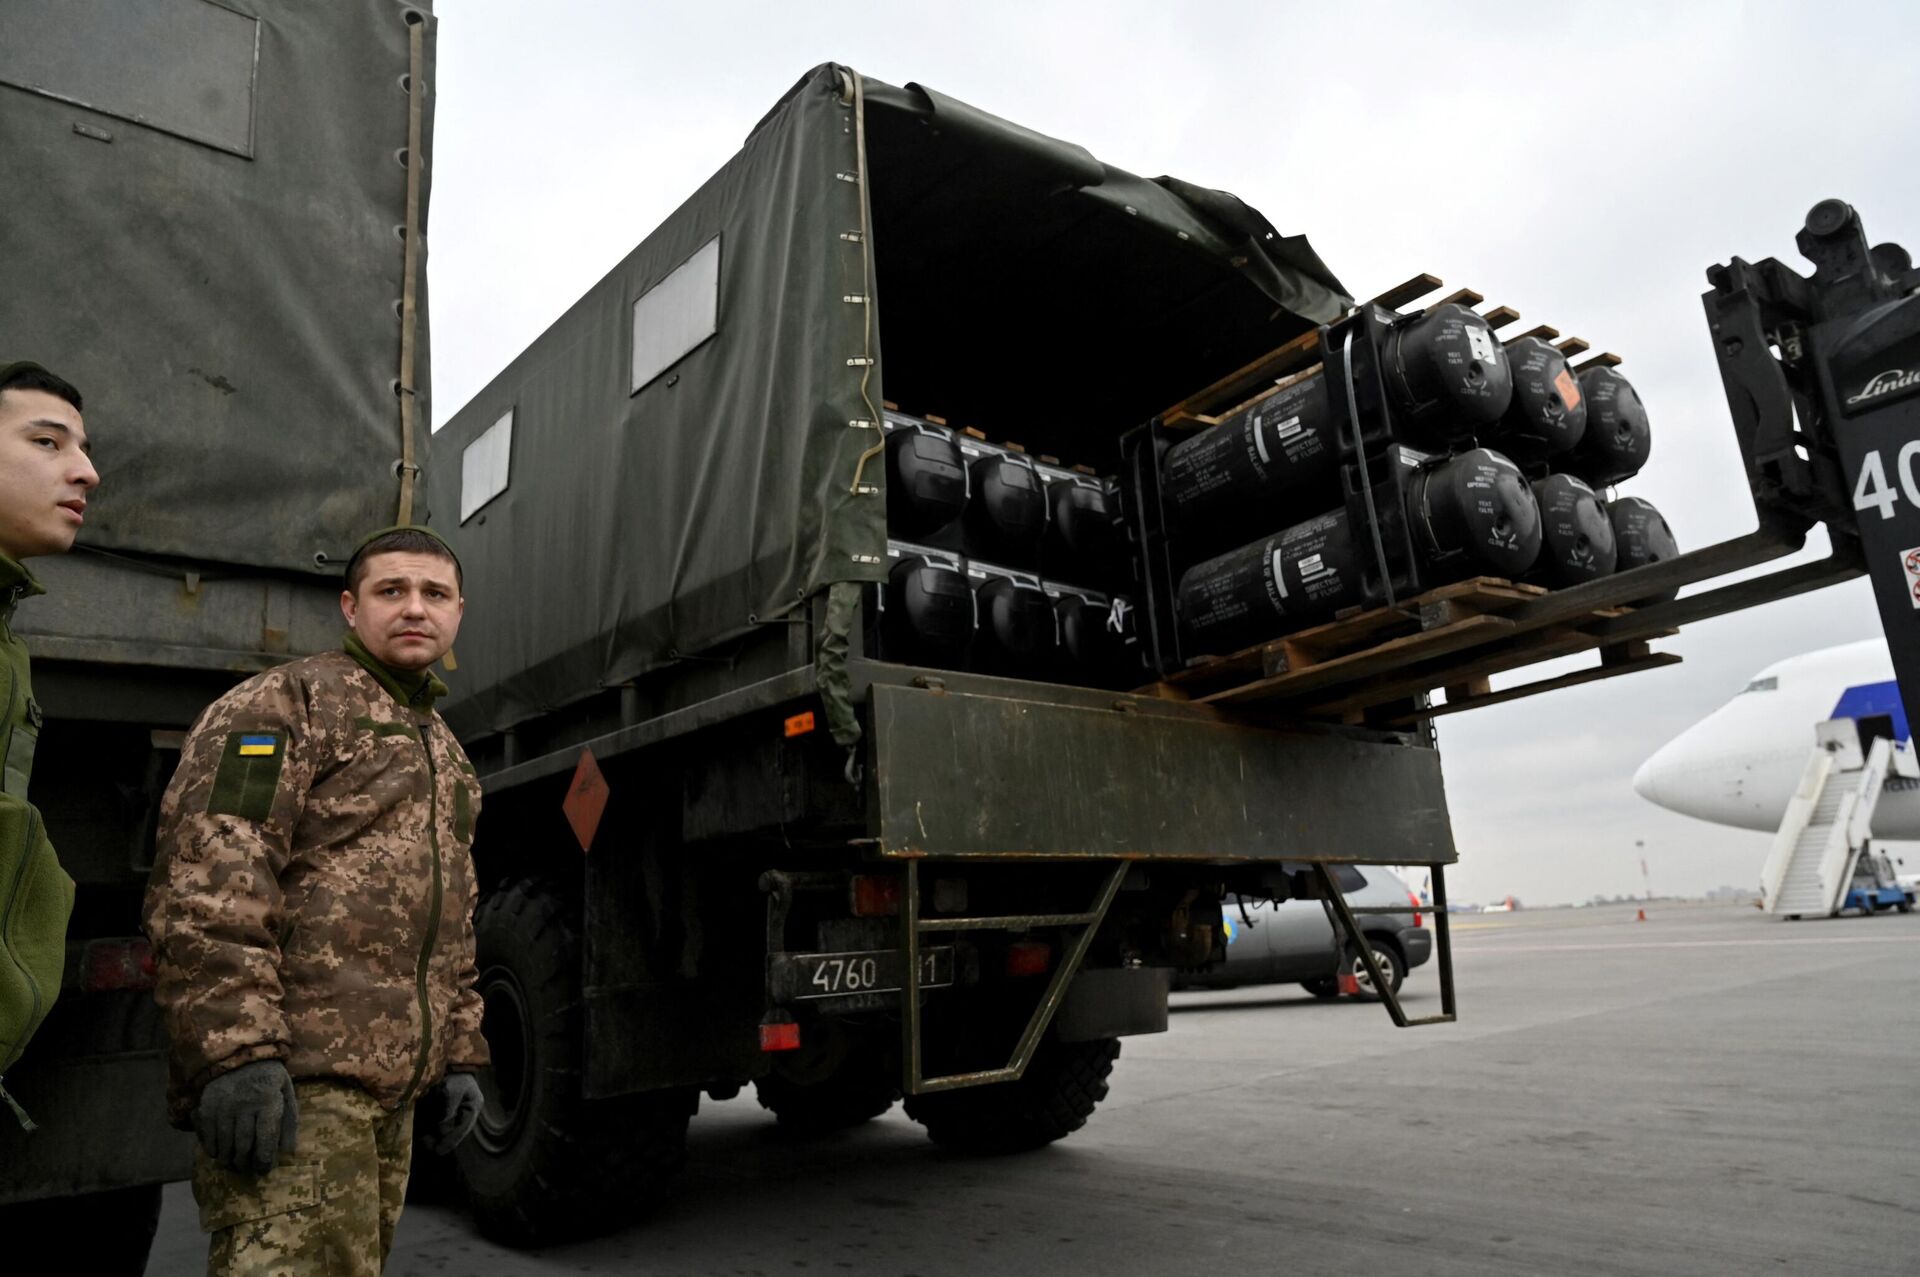 Ukrainian servicemen load a truck with the FGM-148 Javelin, American man-portable anti-tank missile provided by US to Ukraine as part of a military support, upon its delivery at Kiev's airport Borispol on February 11,2022 - Sputnik International, 1920, 27.11.2022